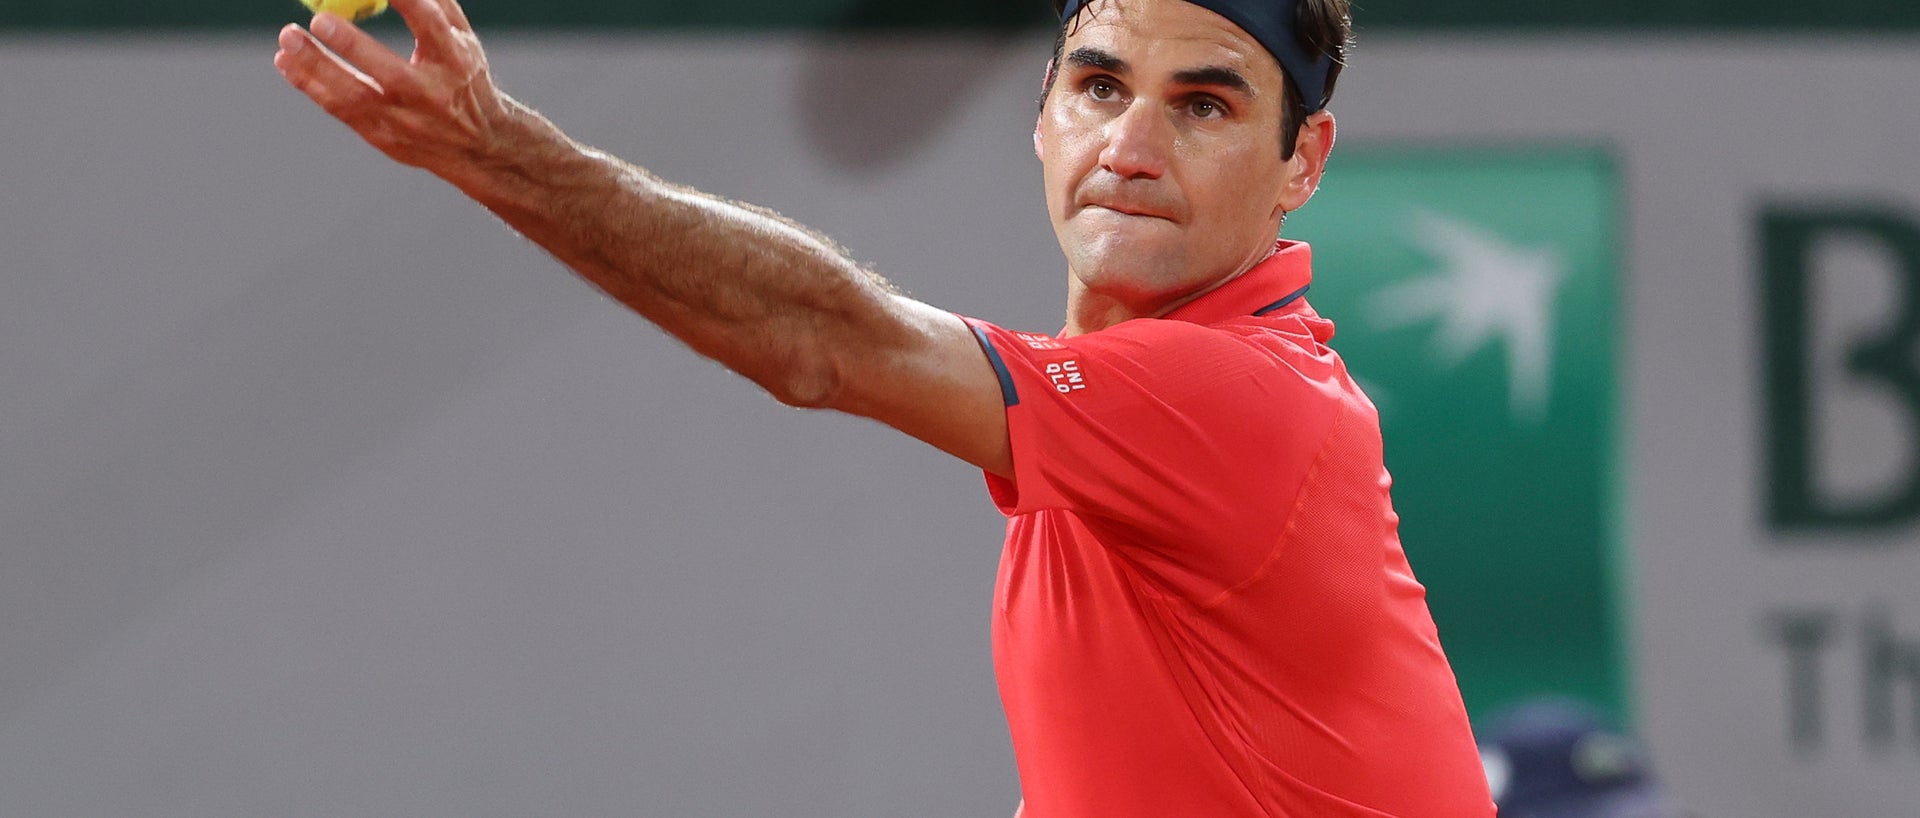 Federer in red shirt on court, holding tennis ball